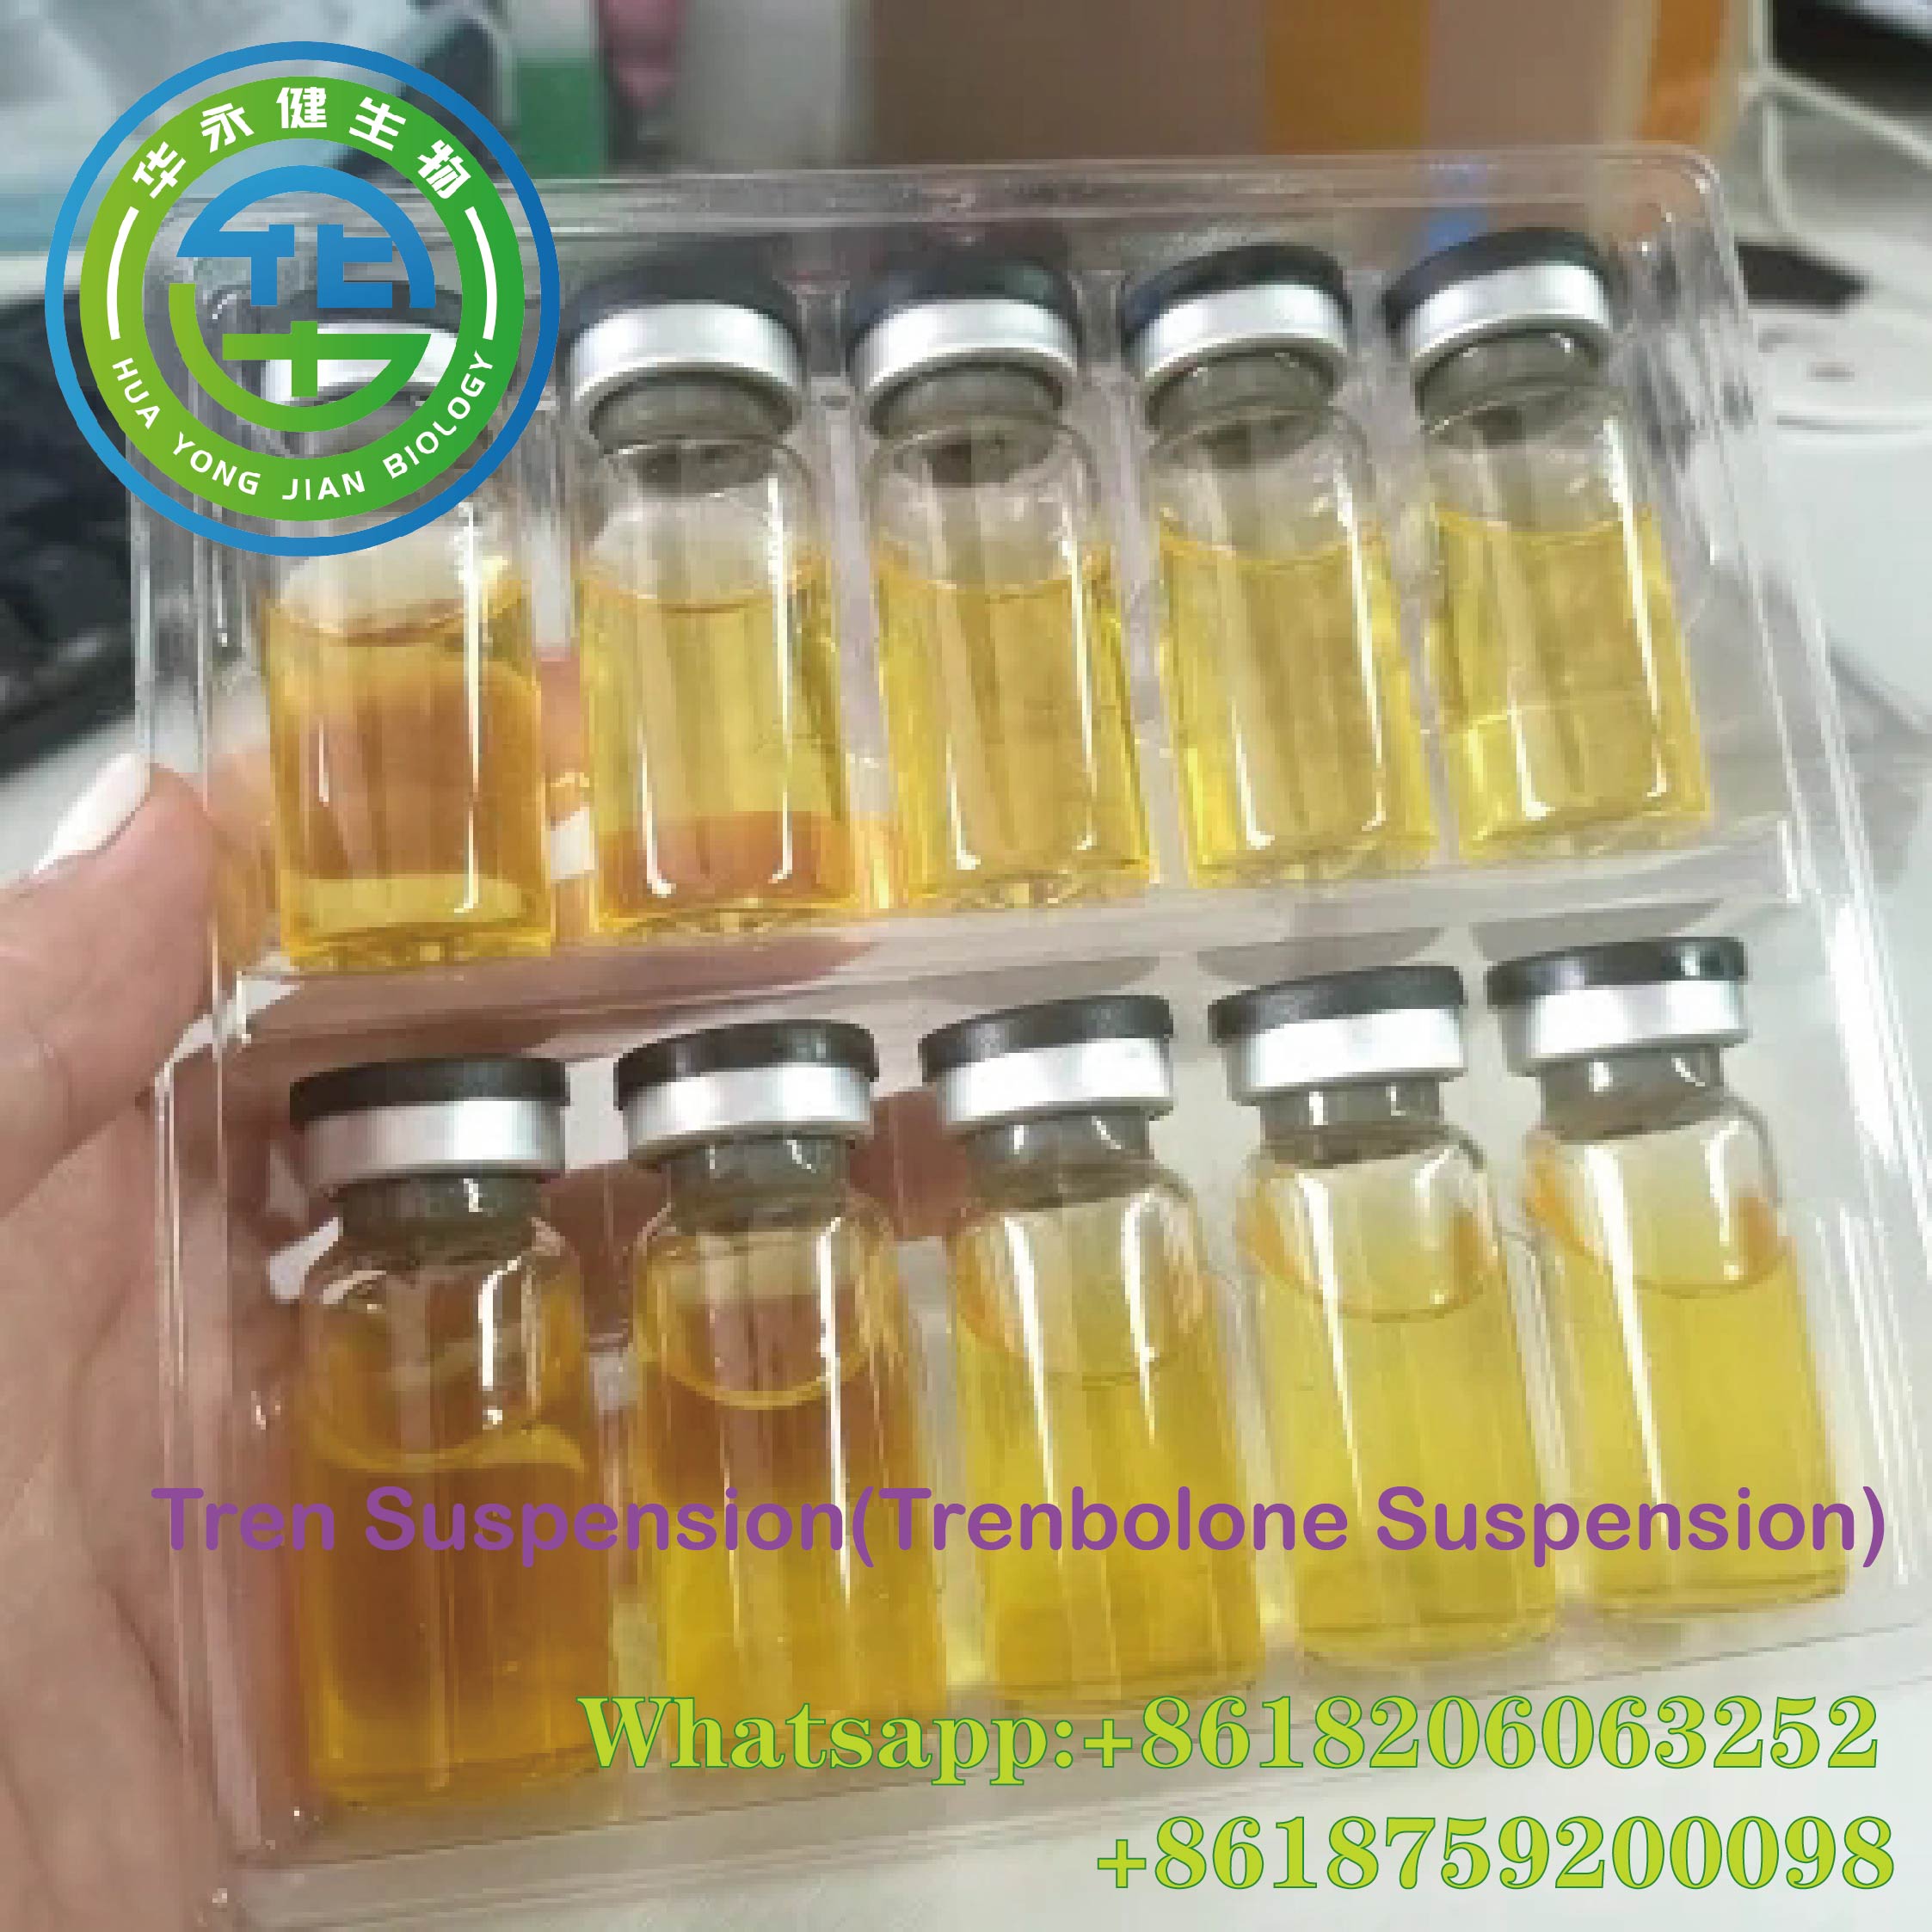 Trenbolone Suspension 100 Body Building Strong Effects 99% Purity 100mg/ml Anabolic Steroids Featured Image